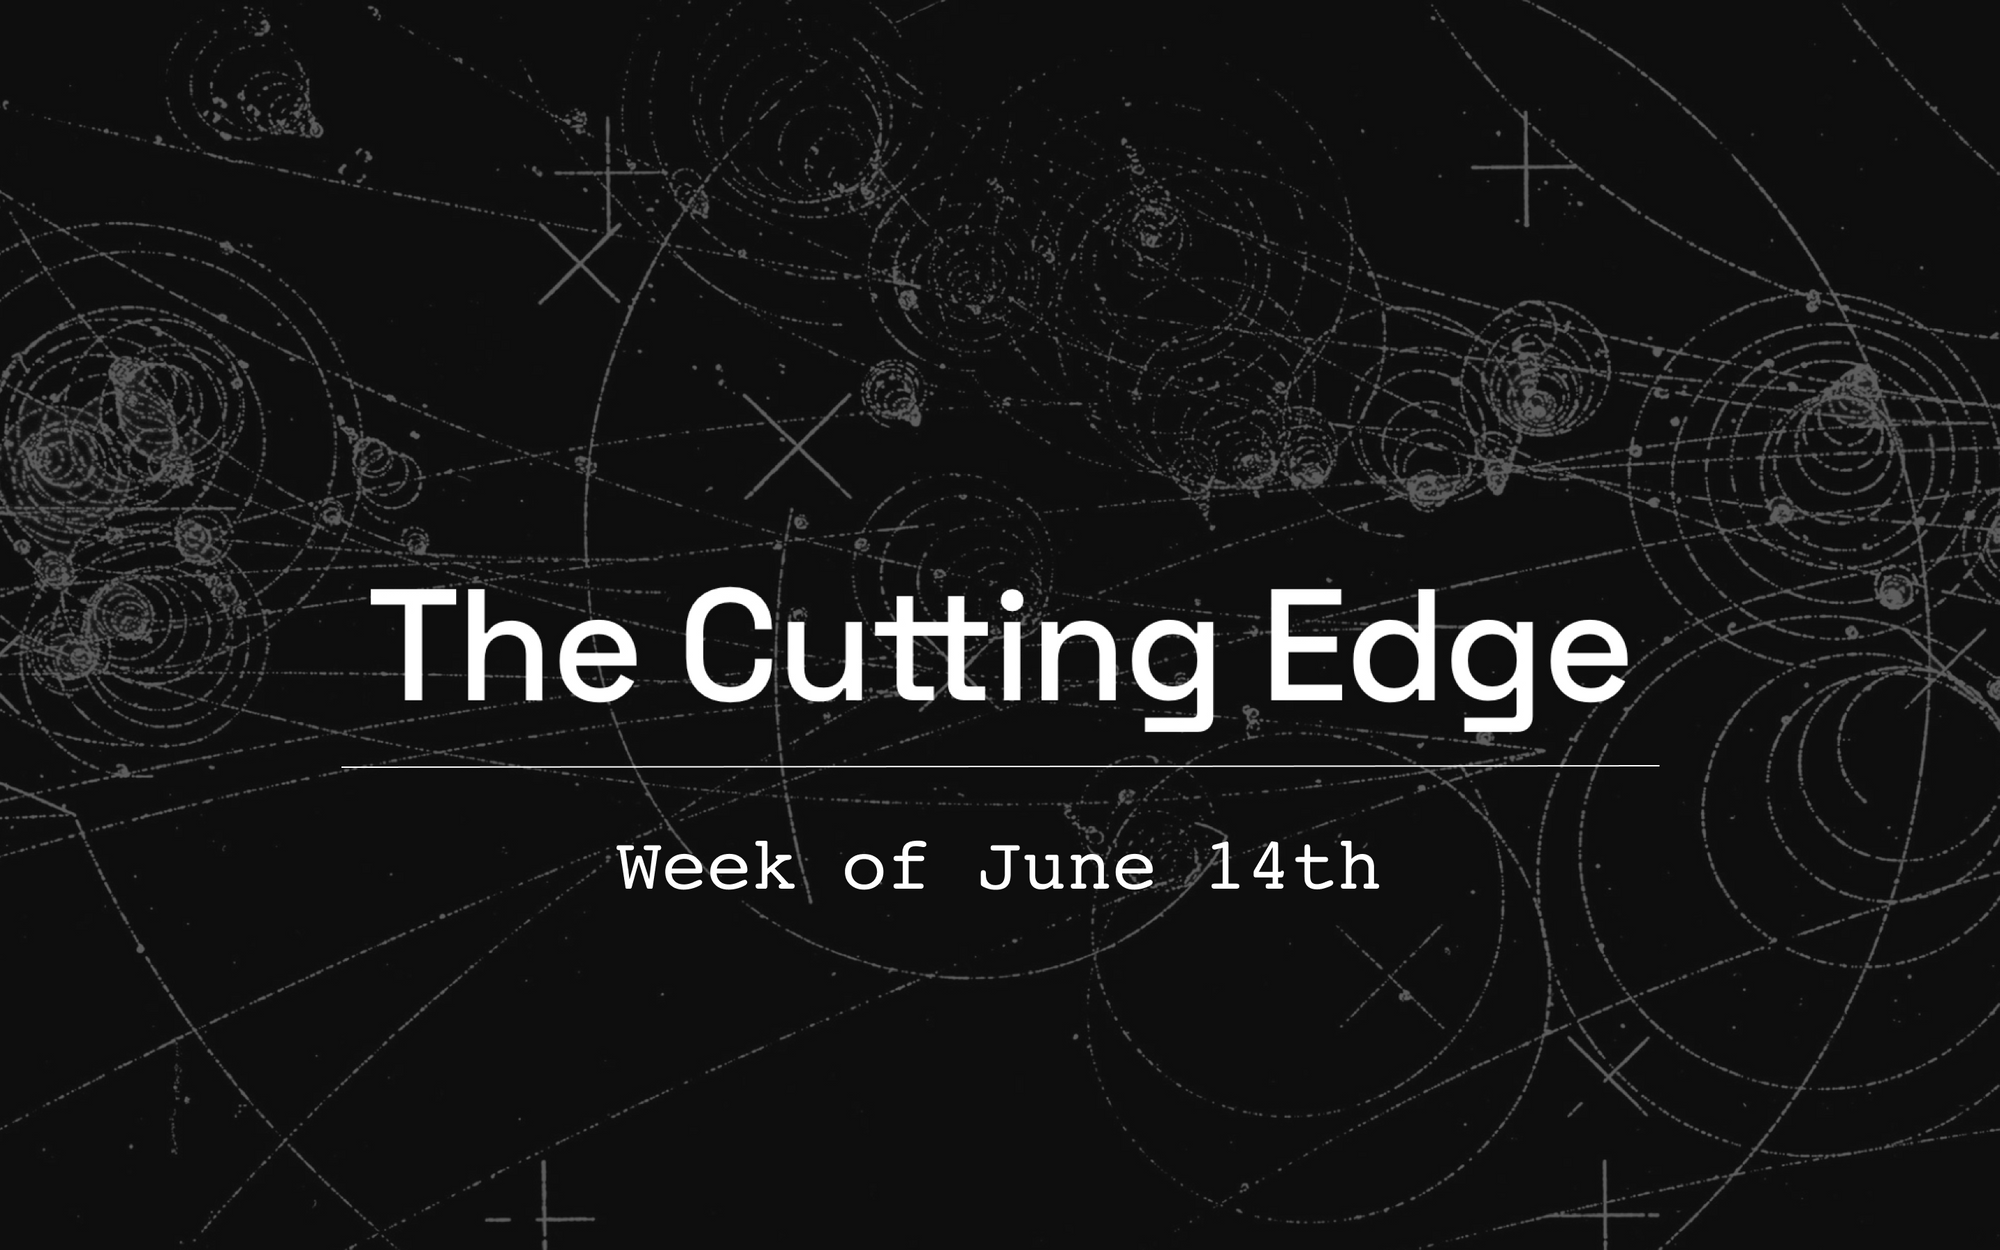 The Cutting Edge: Week of June 14th